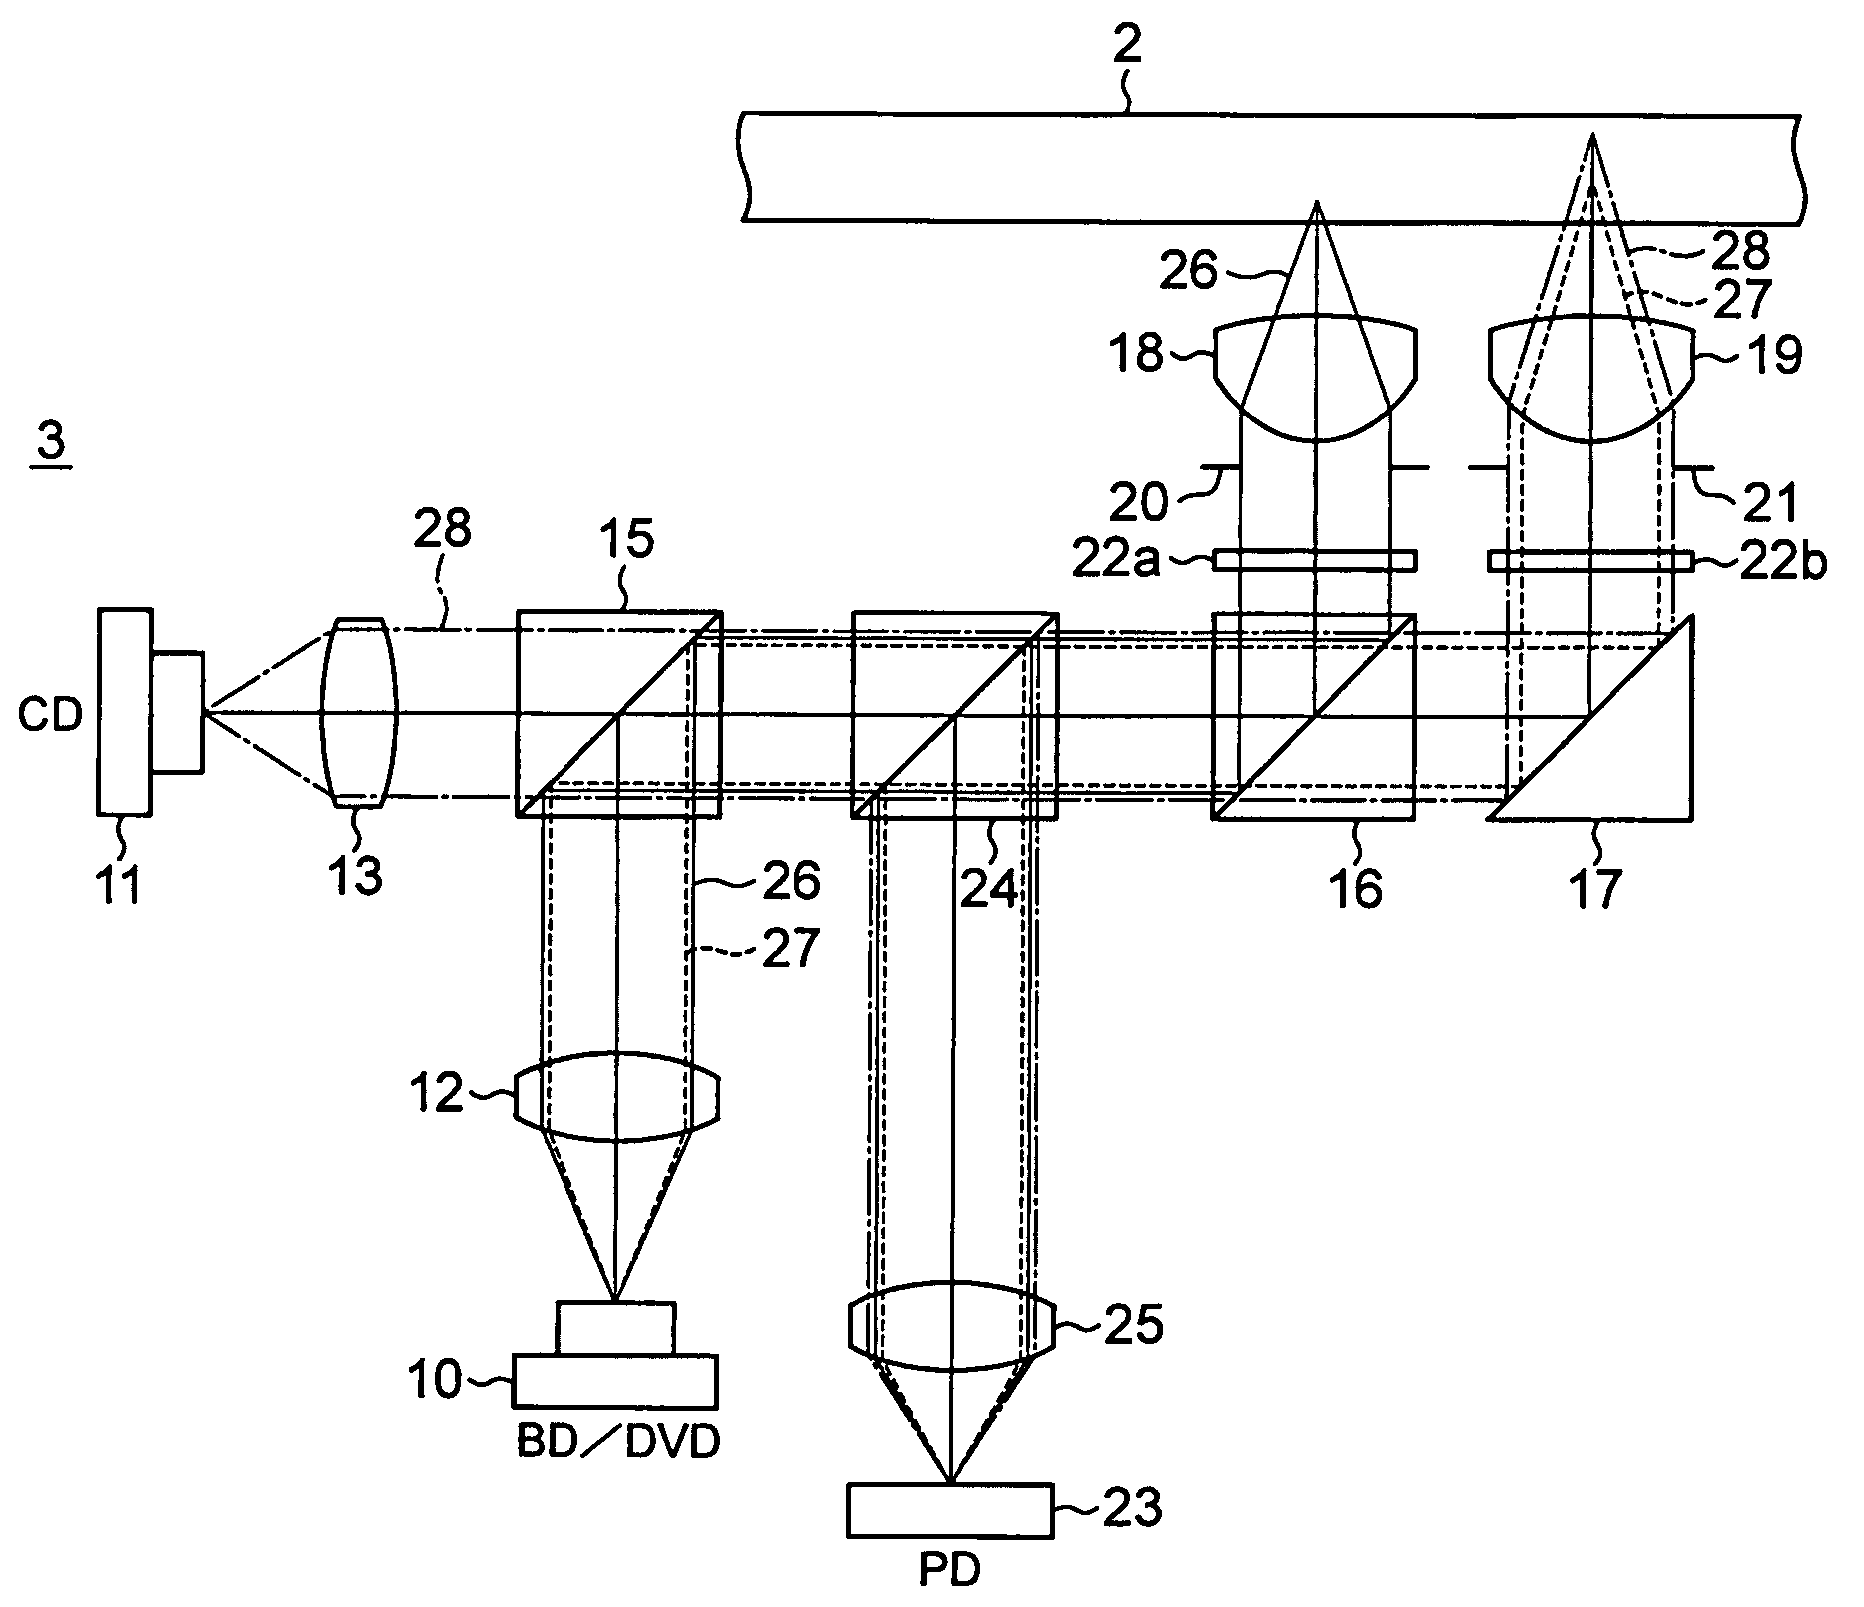 Optical pickup device, recorder and/or reproducer